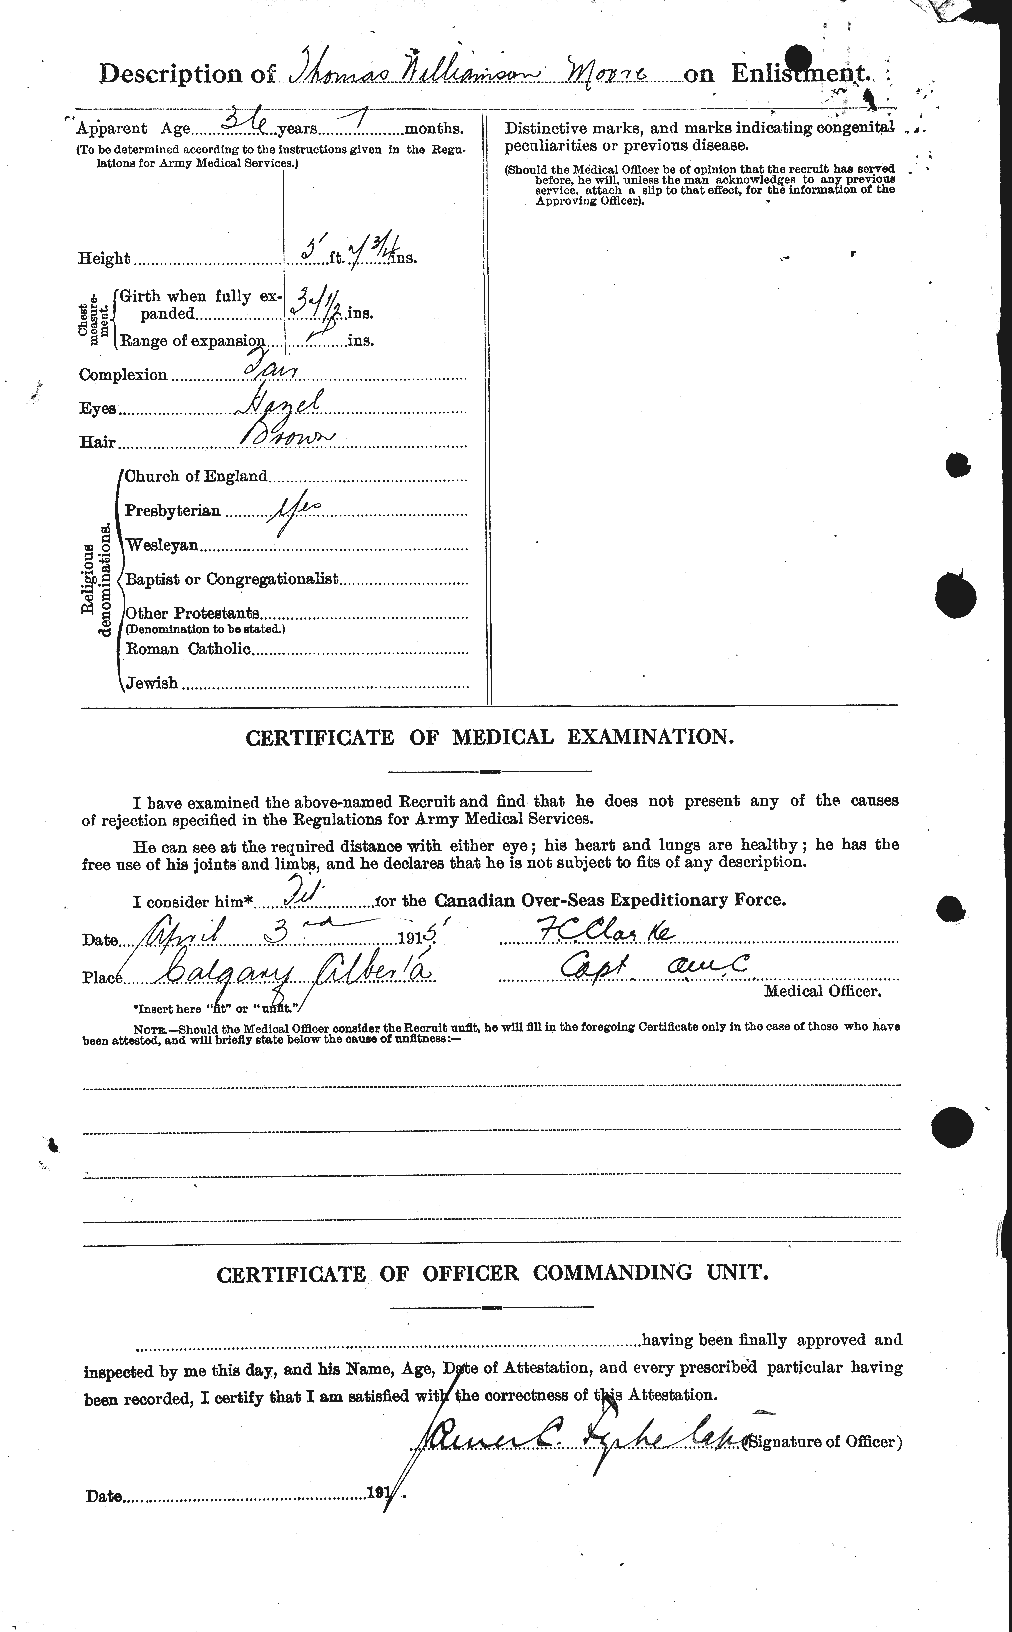 Personnel Records of the First World War - CEF 505677b